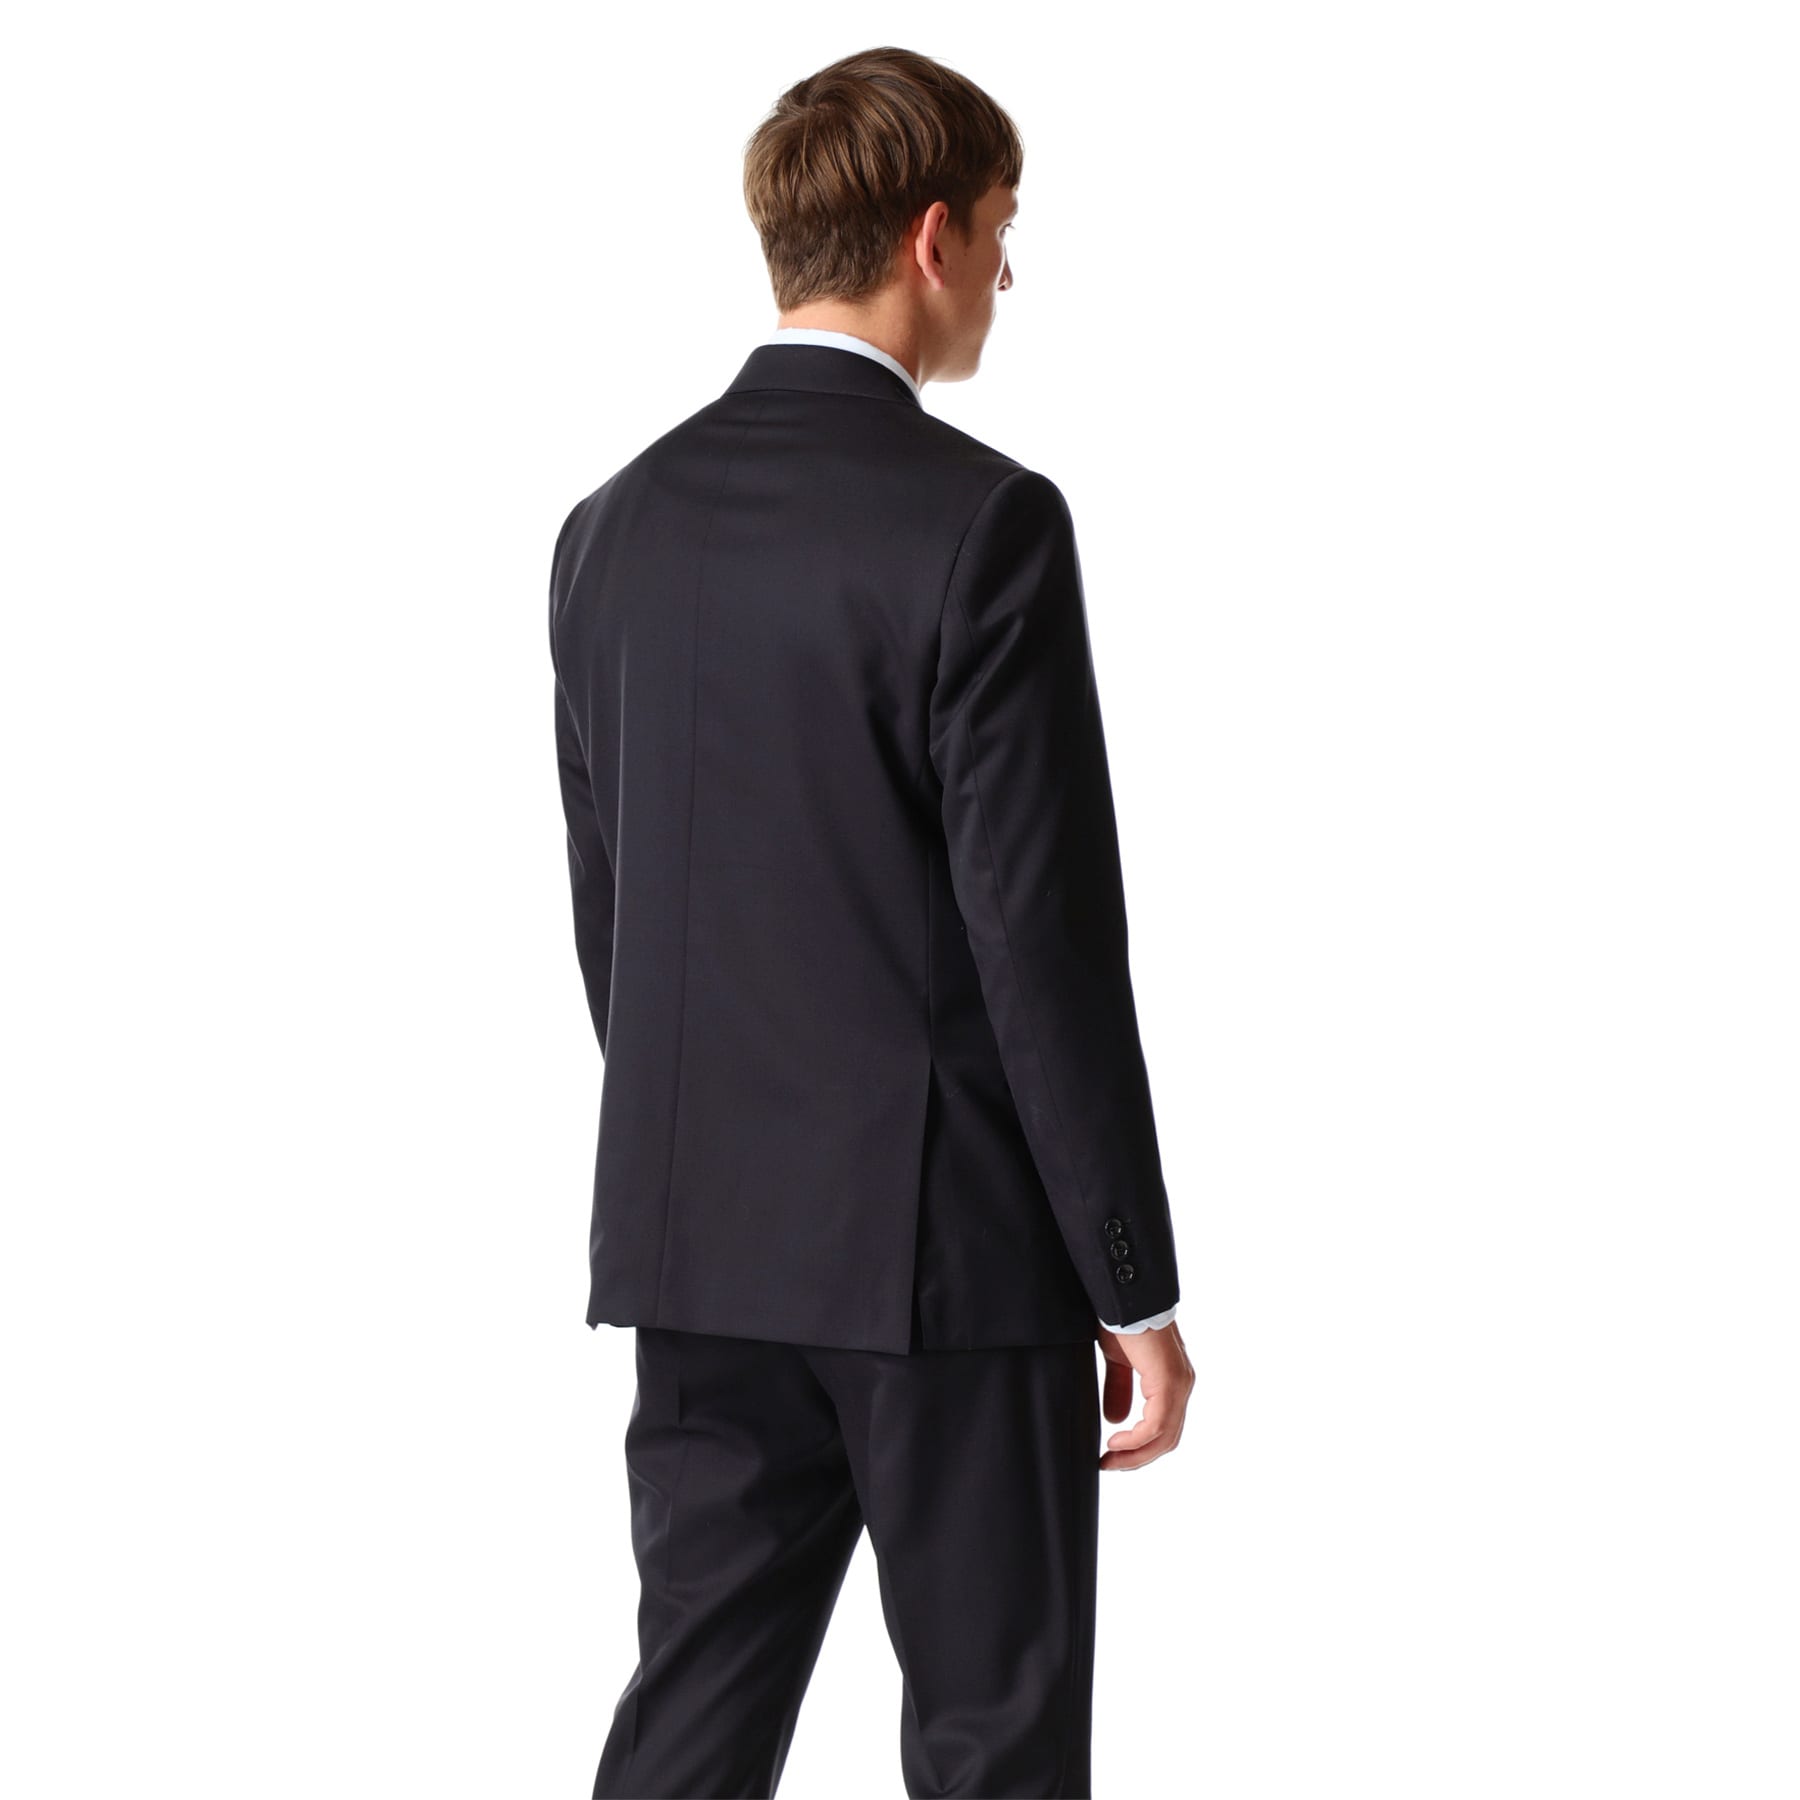 SOPH. | 2B SUITS(S NAVY):